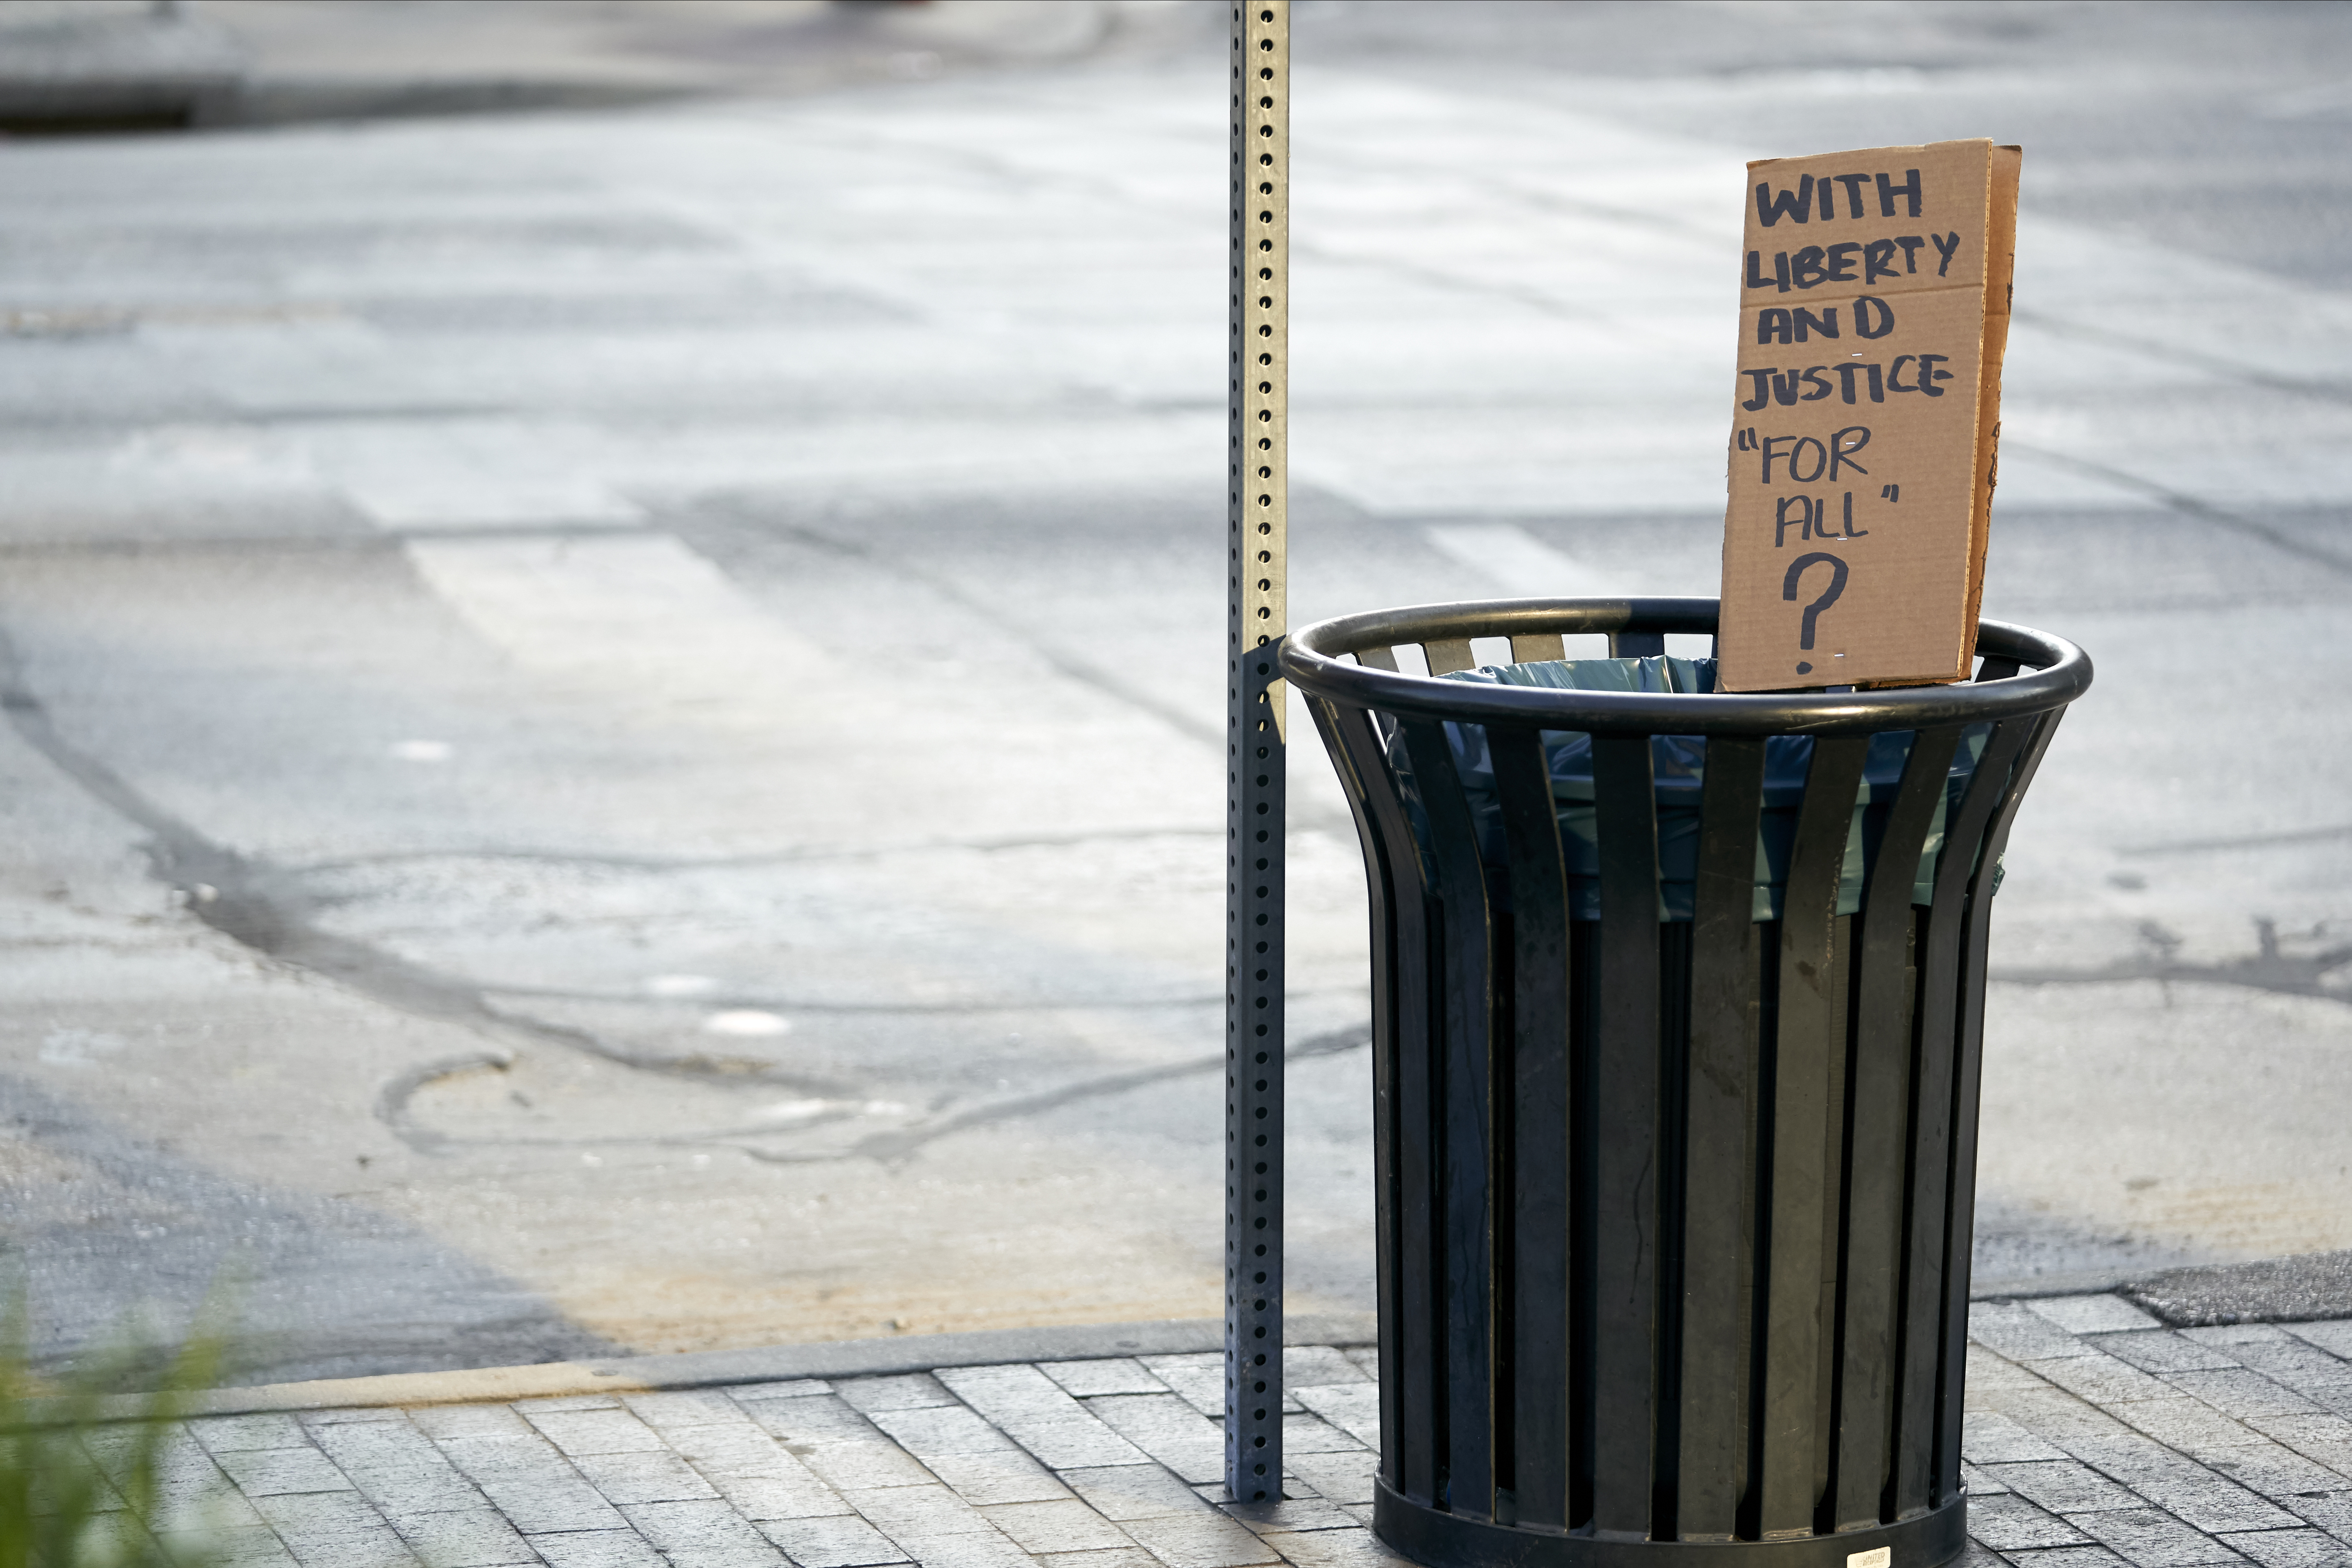 A sign protesting police brutality is seen in a Dallas trash can